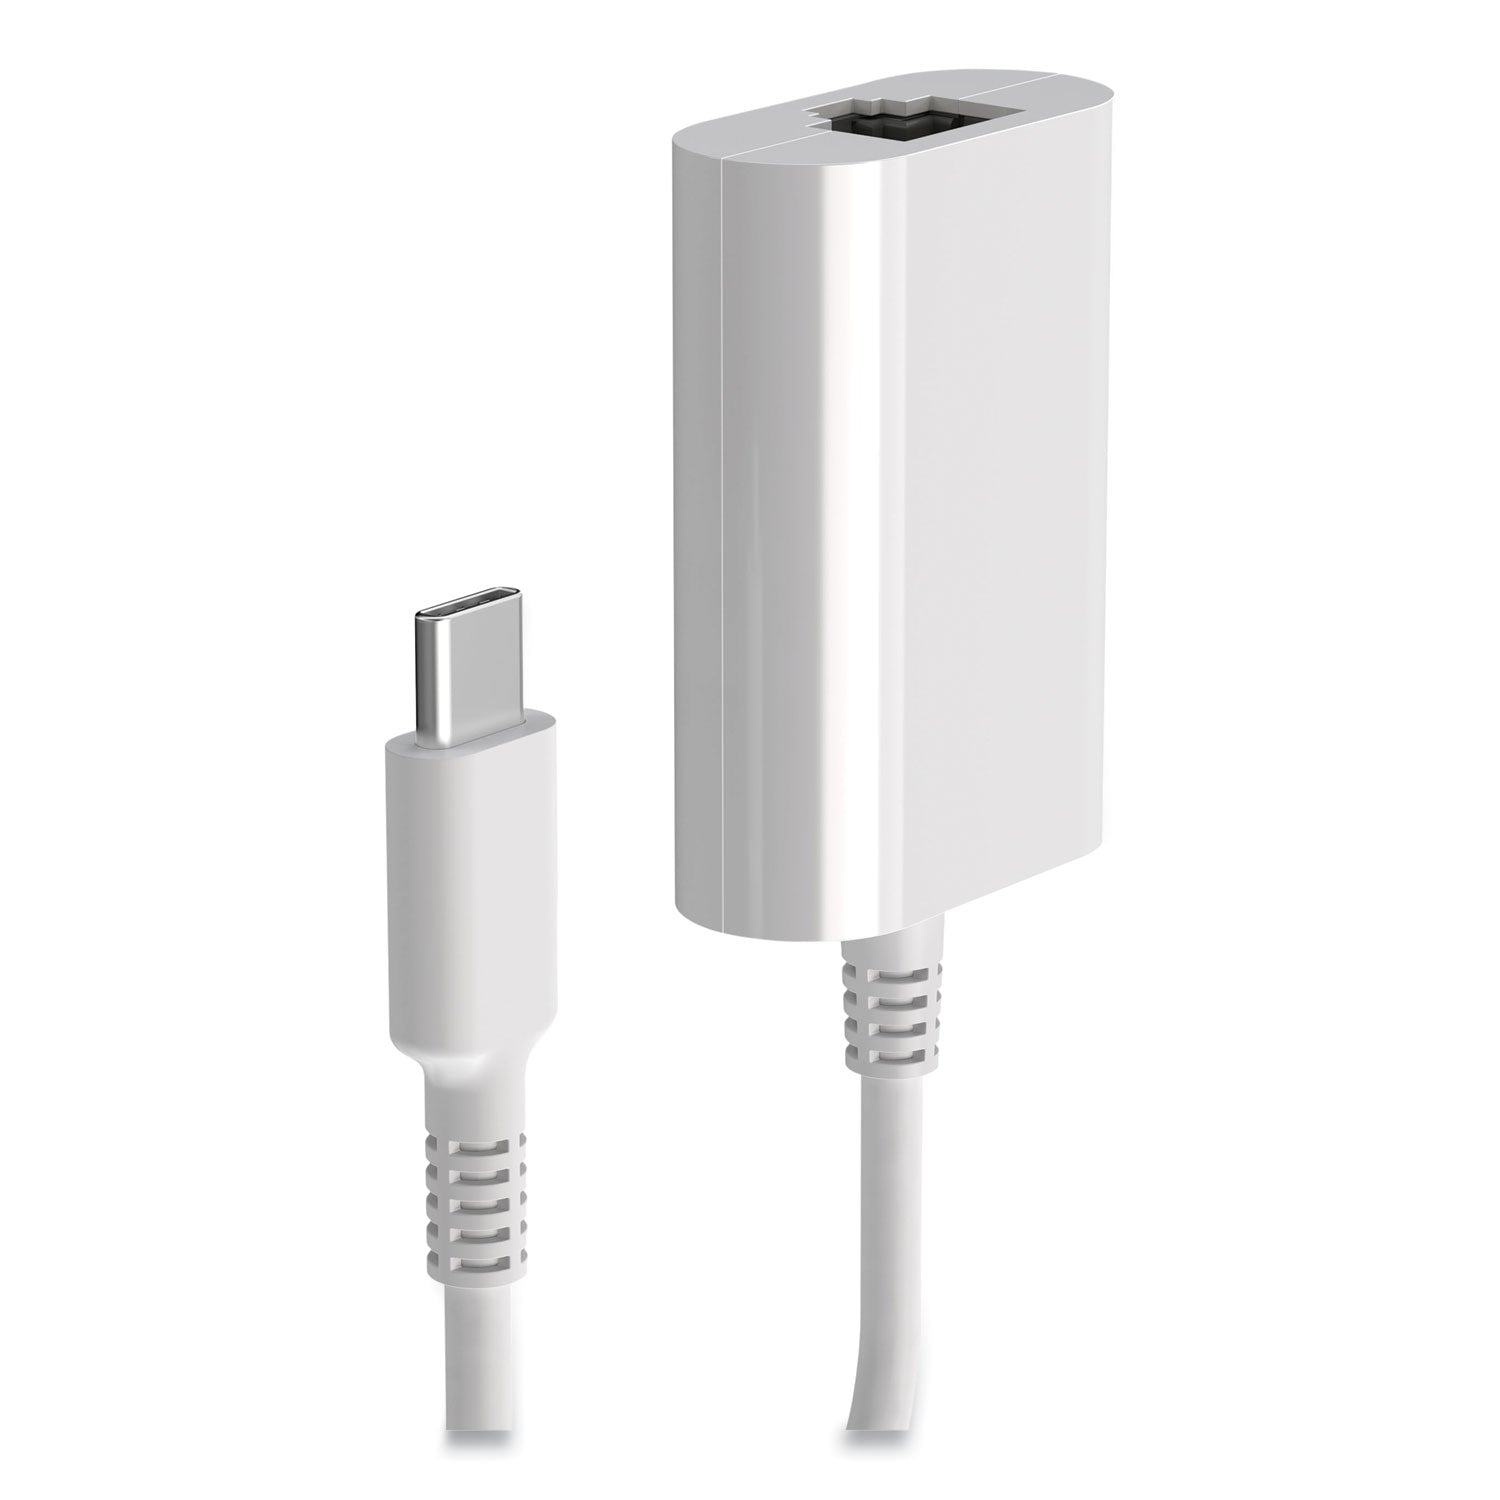 usb-to-ethernet-adapter-usb-type-c-male-rj-45-female-6-white_nxt24400039 - 3